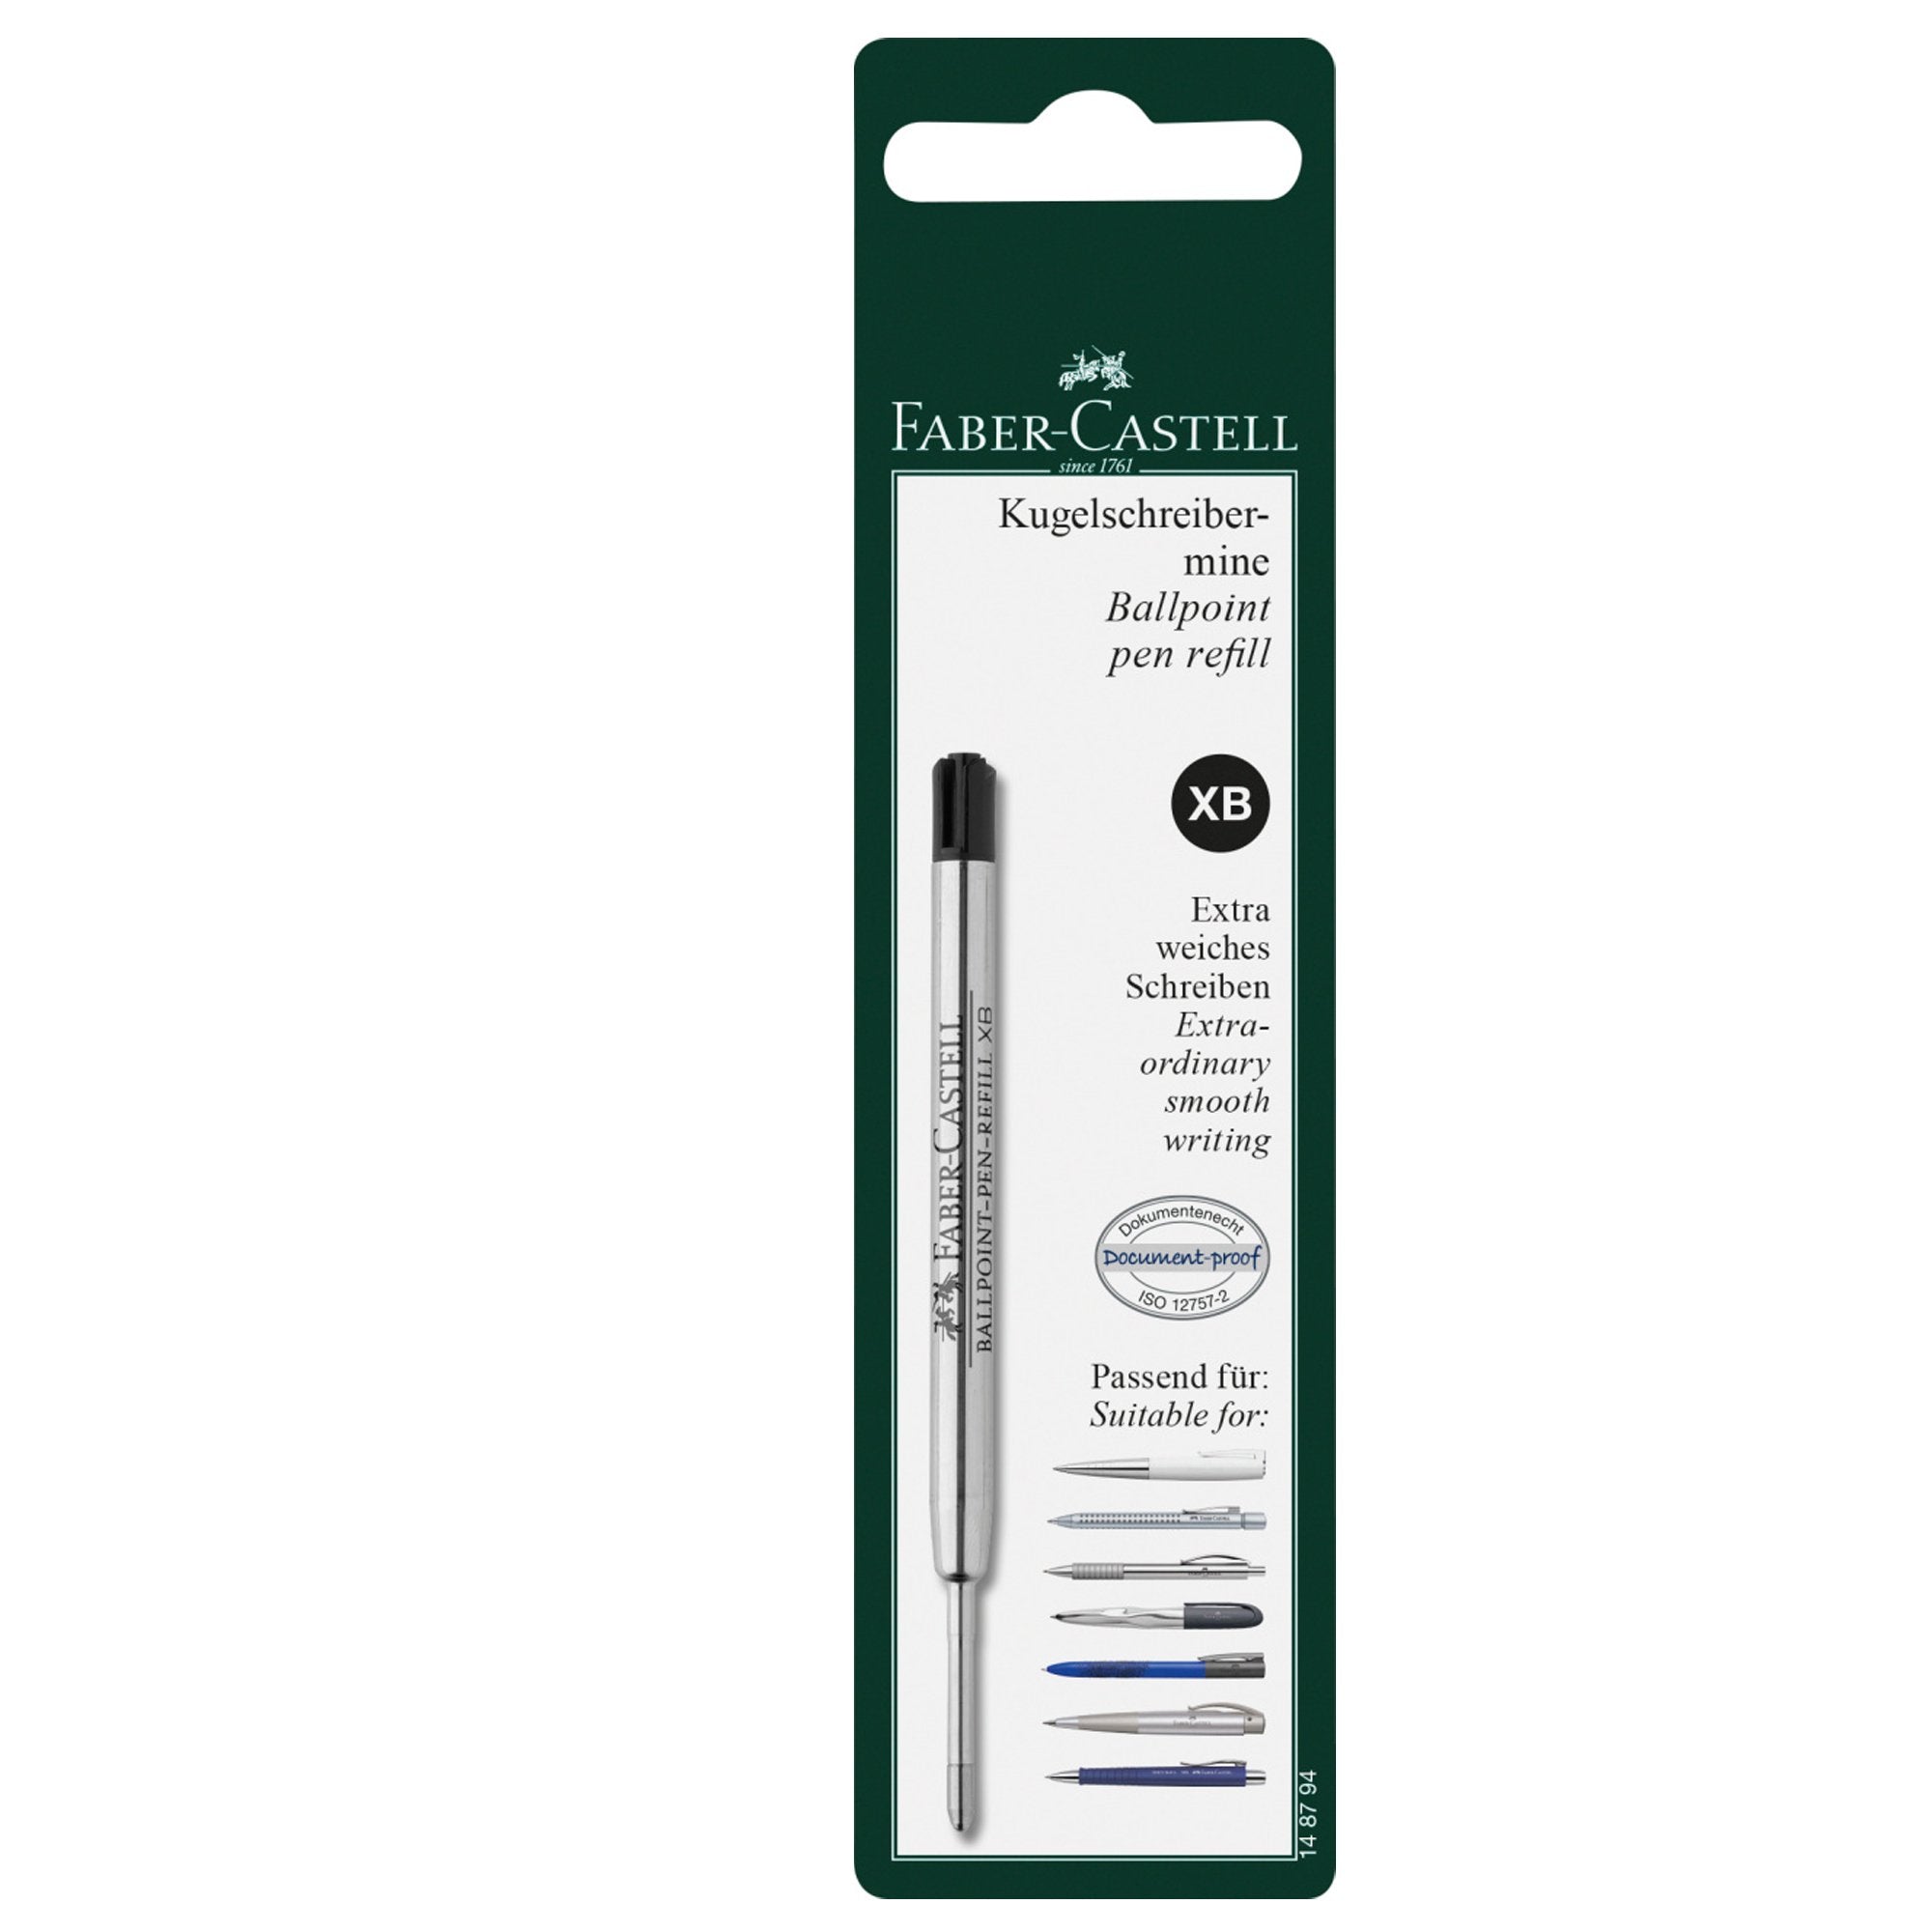 faber-castell-blister-refill-xb-nero-penna-poly-ball-faber-castell